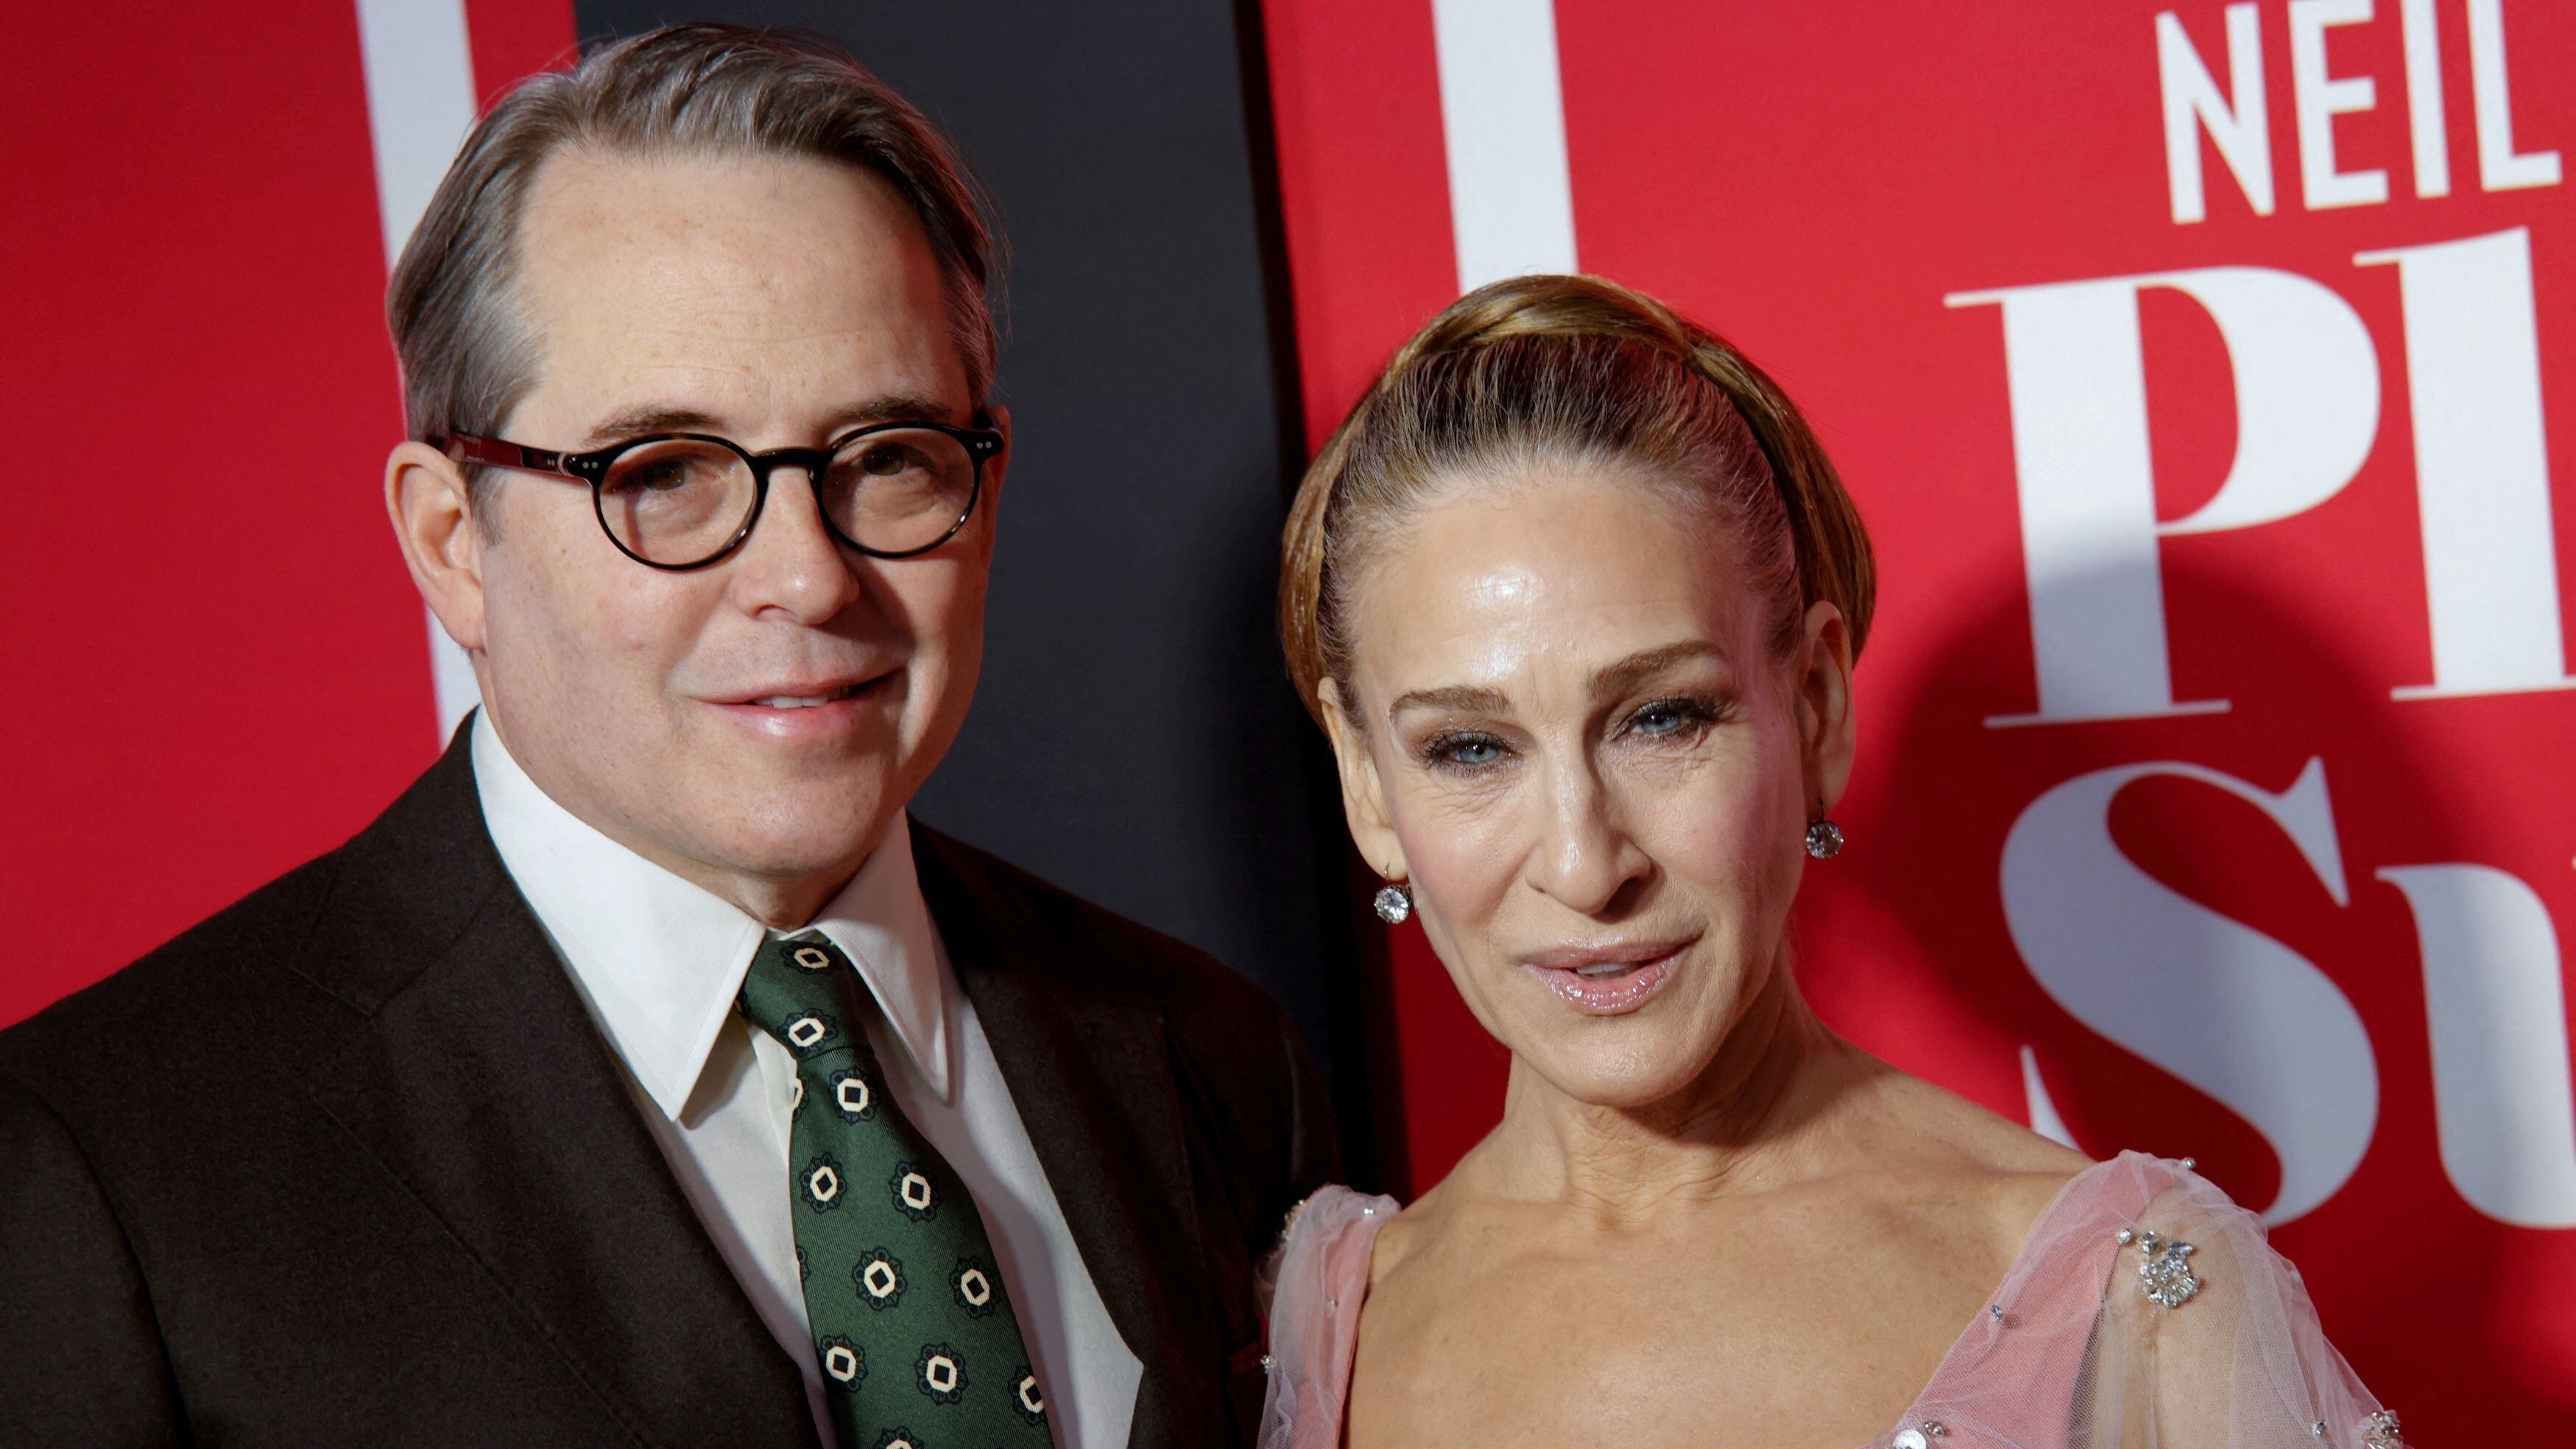 FILE PHOTO: Sarah Jessica Parker and Matthew Broderick arrive to celebrate the opening of their new play, 'Plaza Suite' in New York City, U.S., March 28, 2022. REUTERS/Eduardo Munoz/File Photo